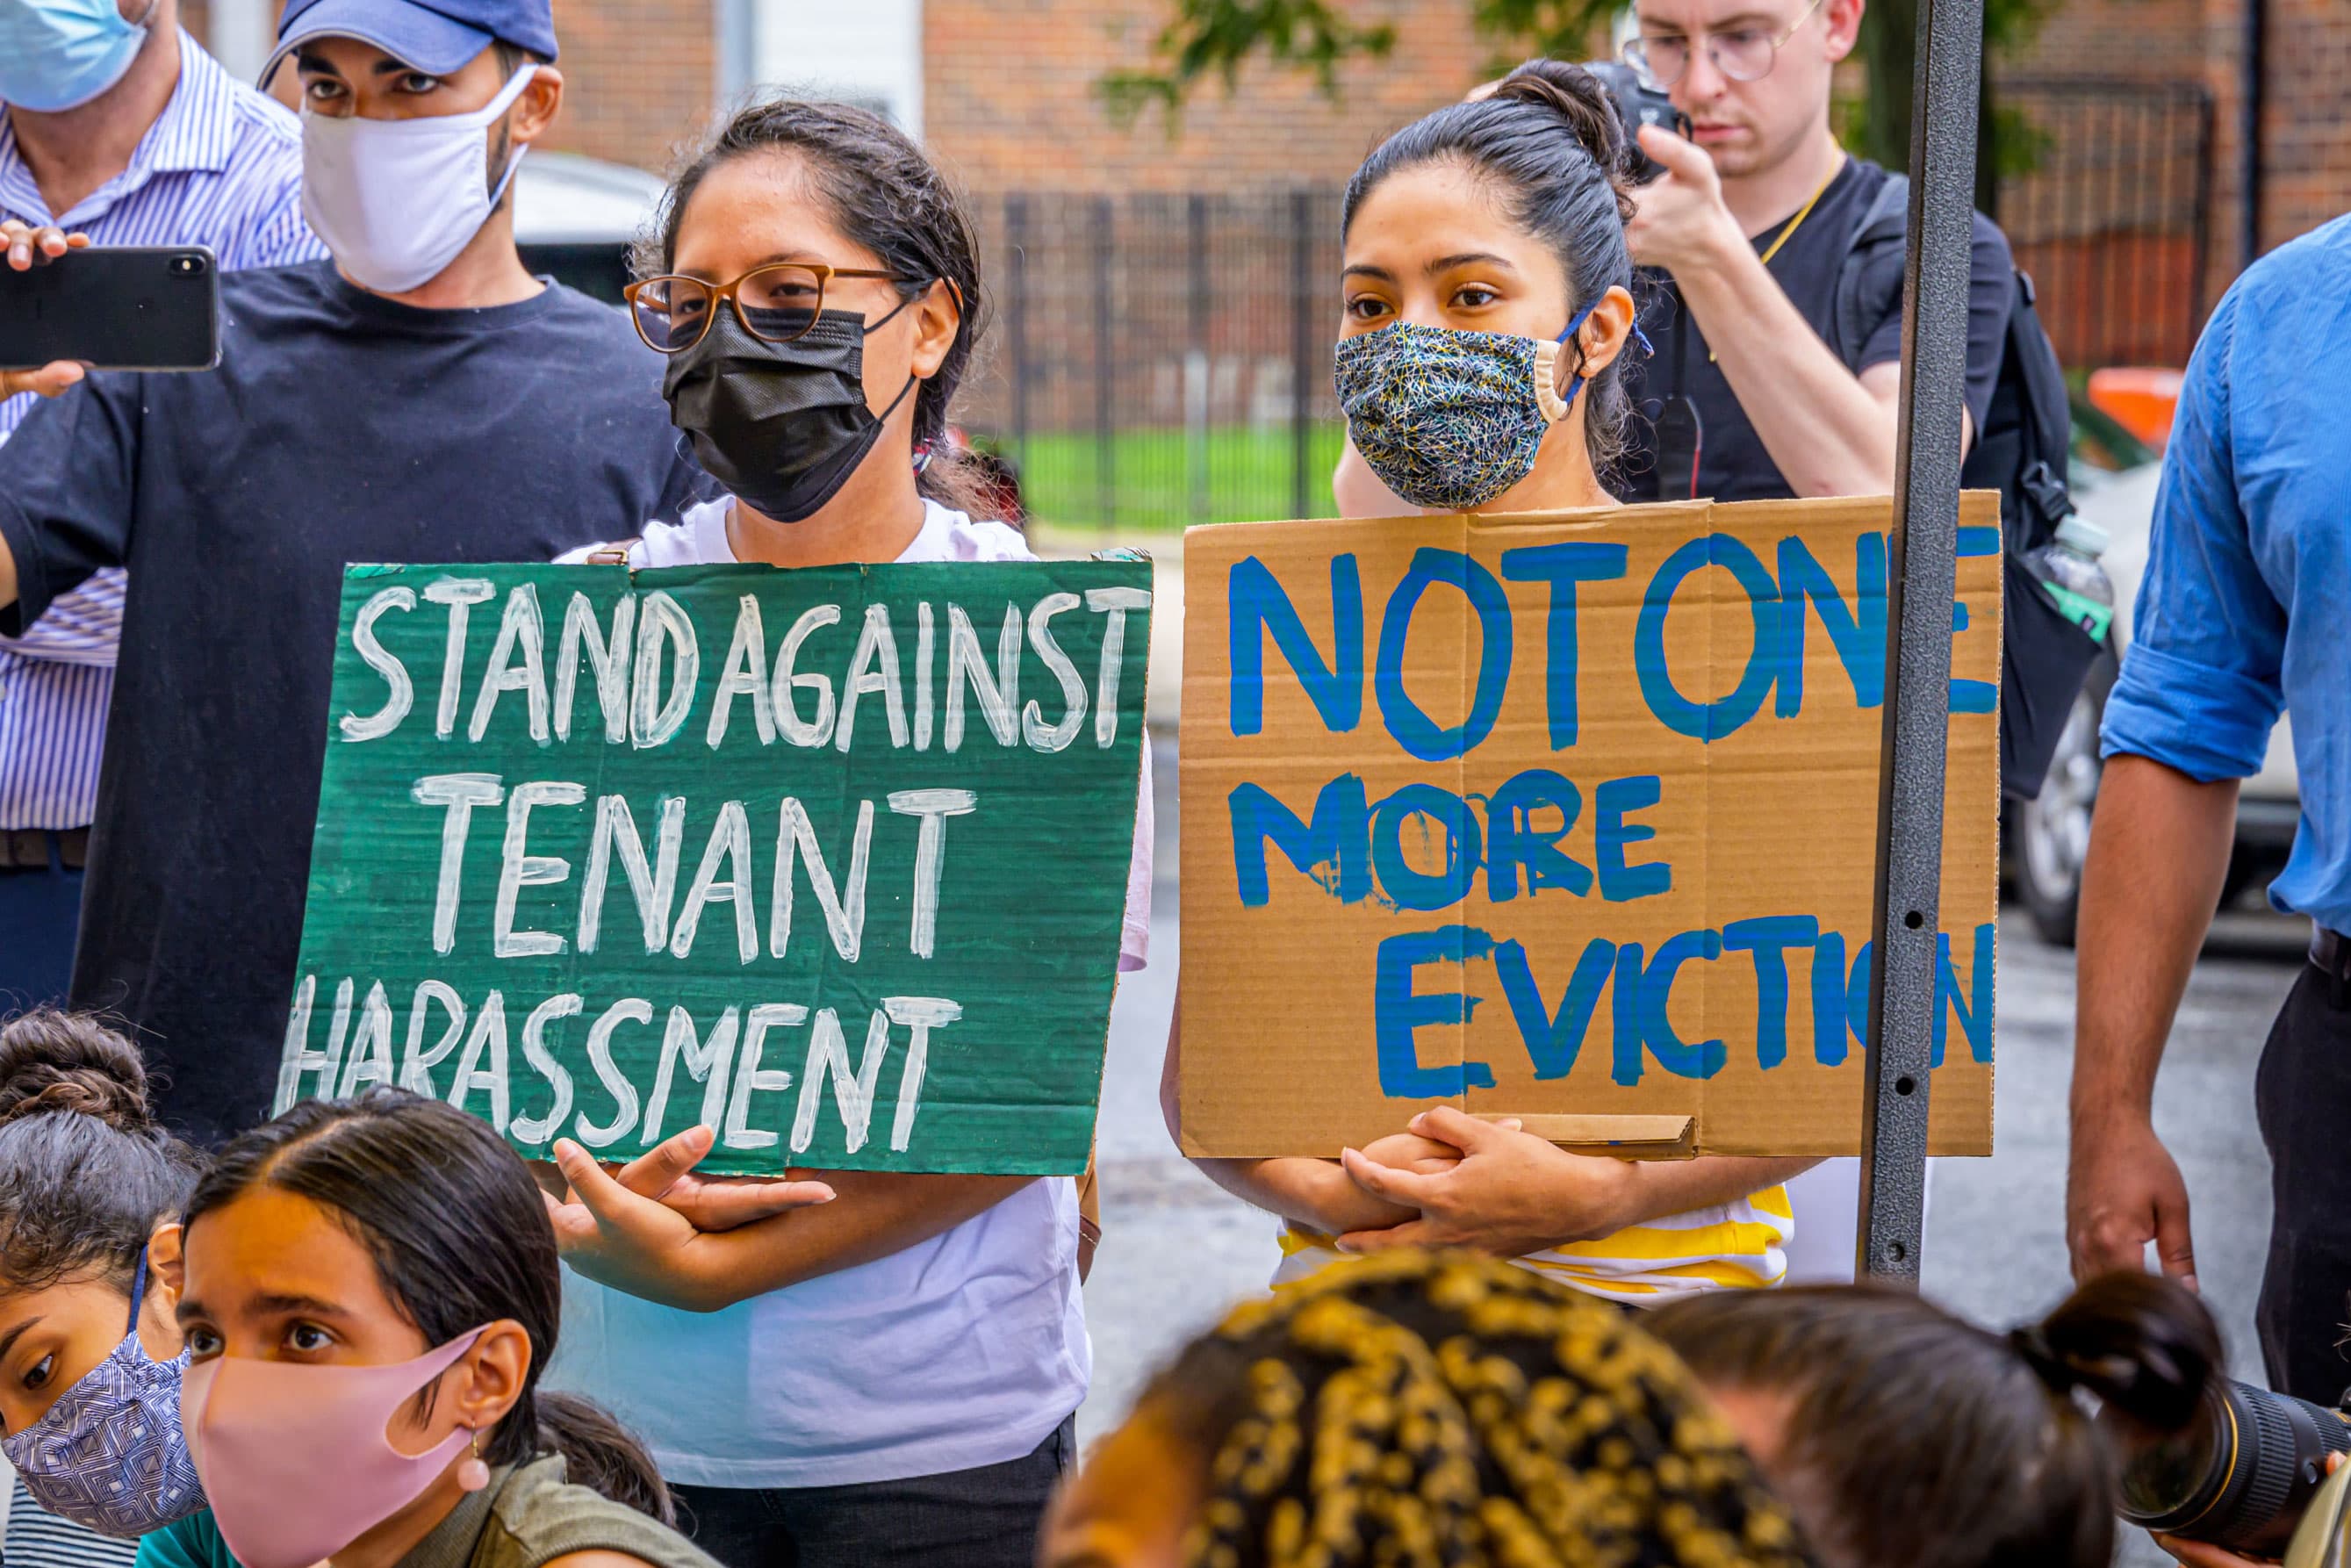 New York extends eviction protection for renters until Jan. 15